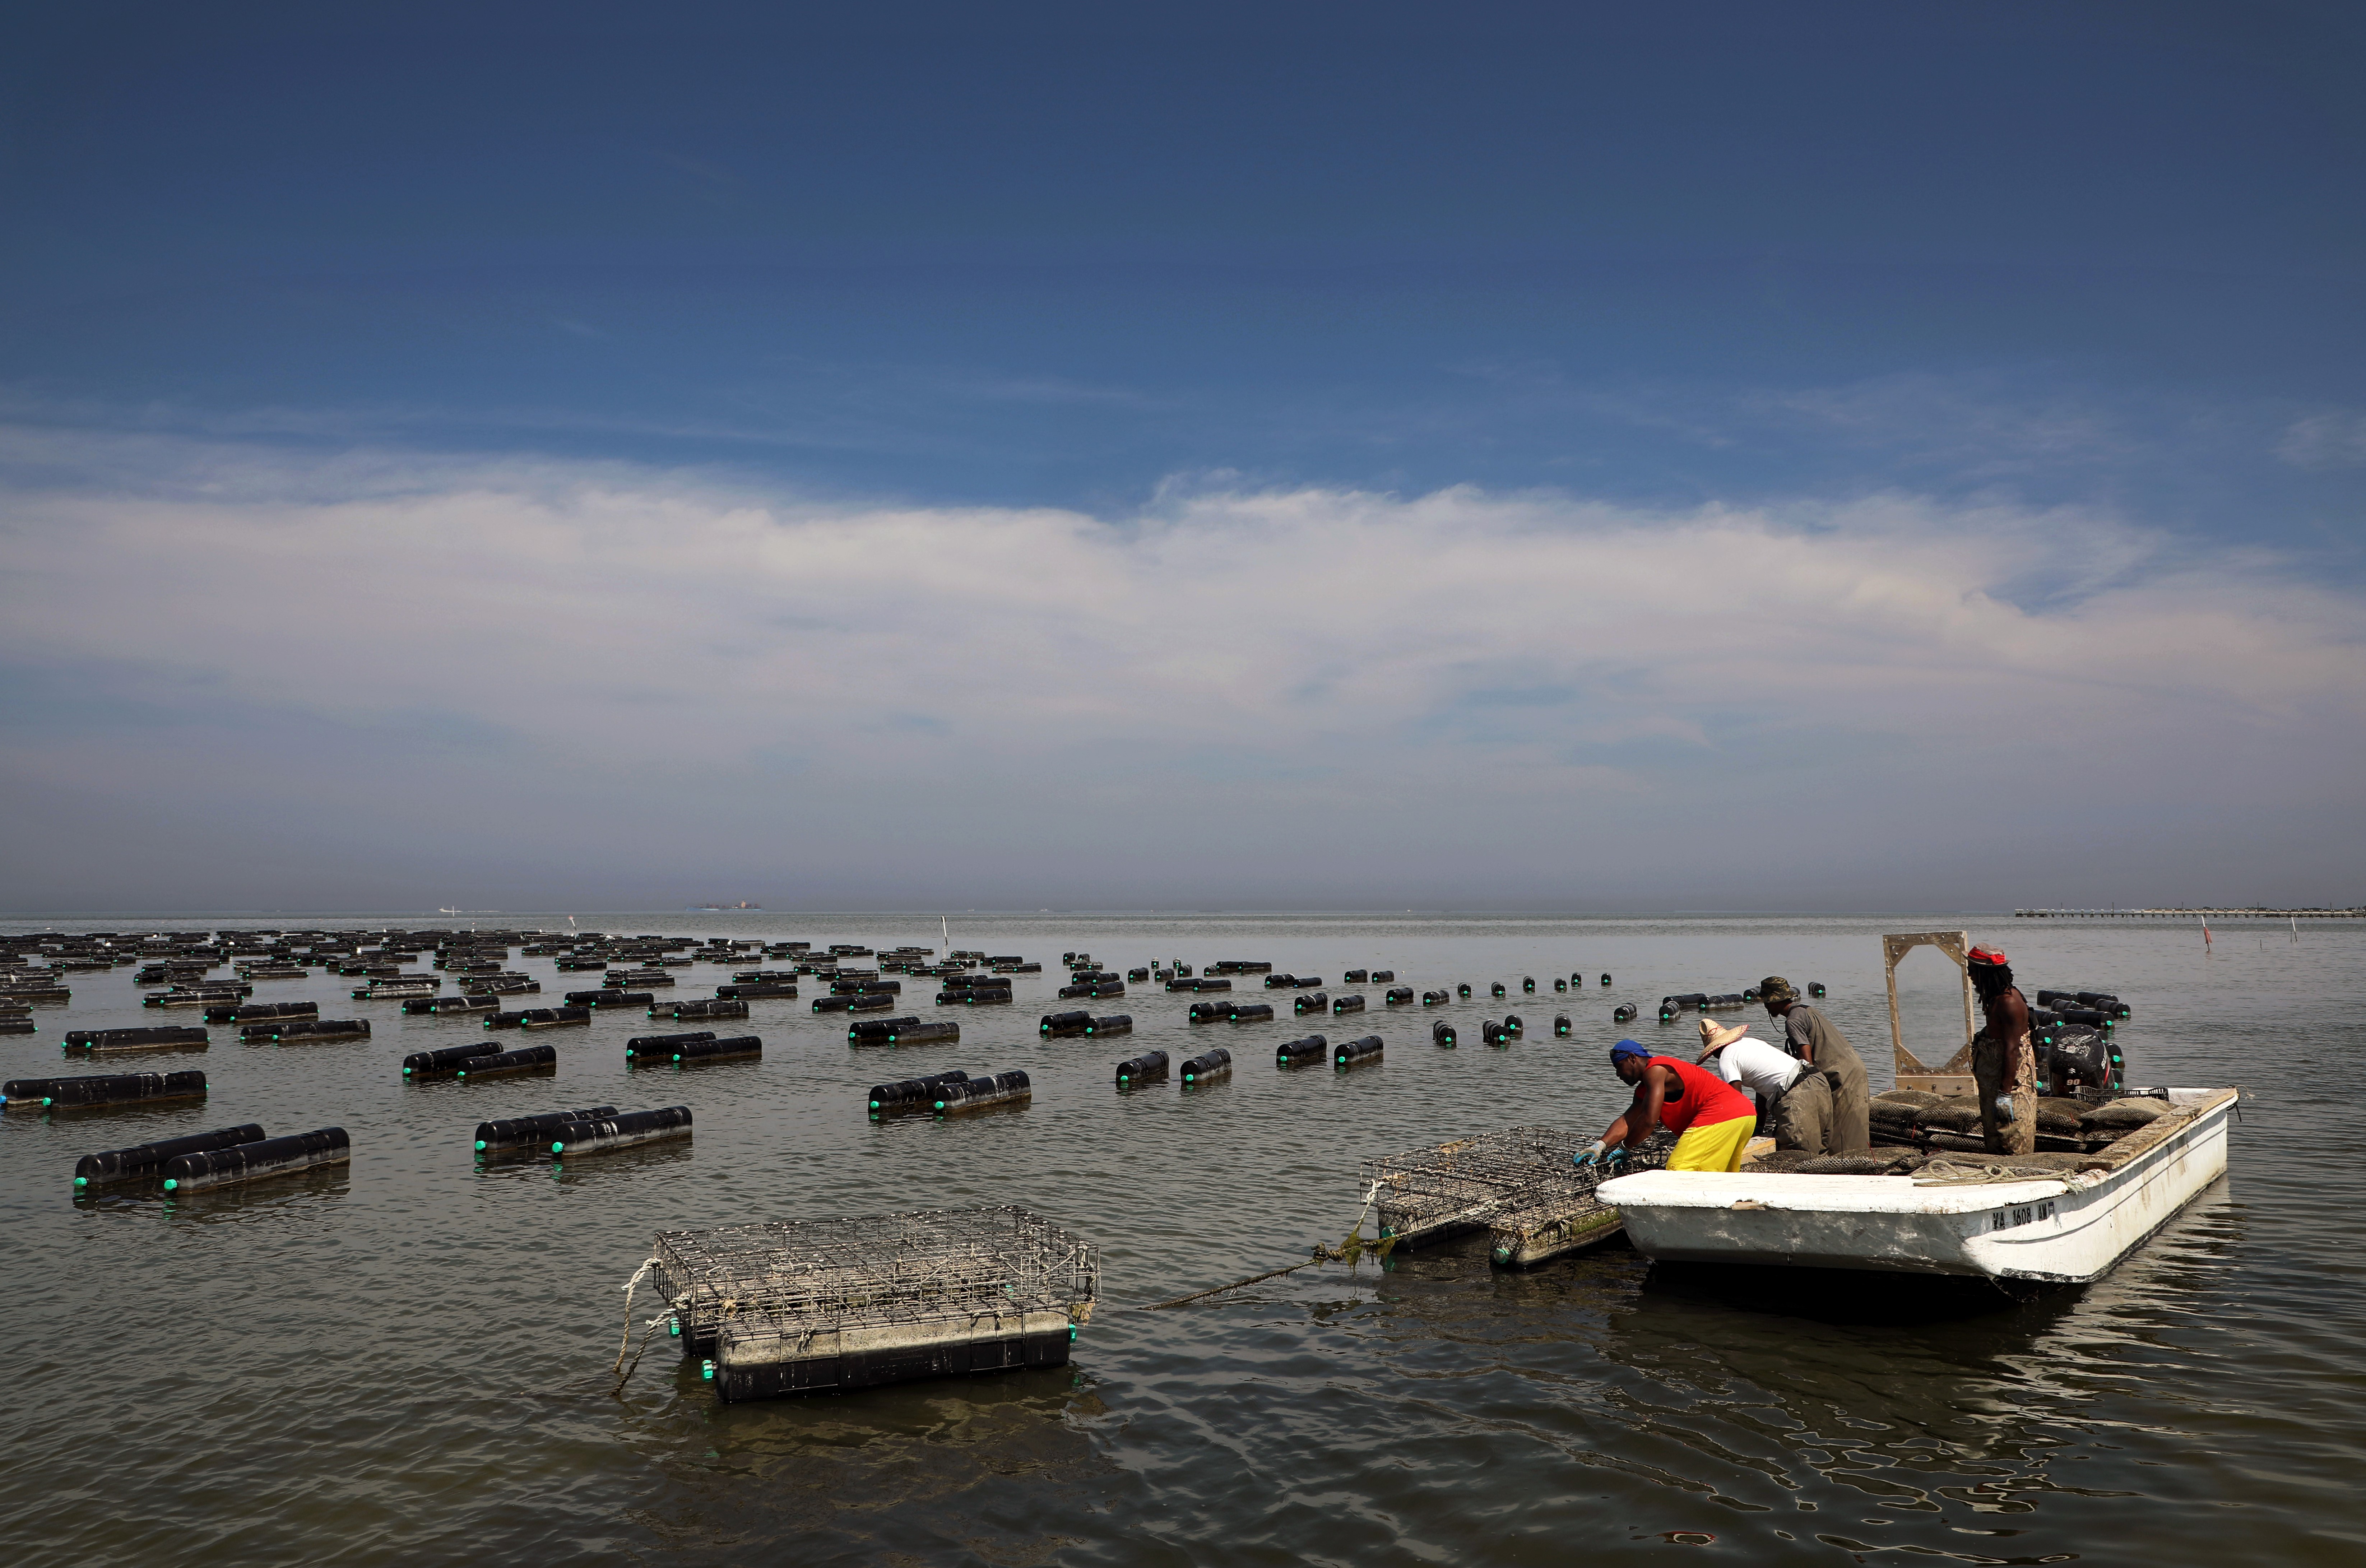 Shellfish farmers tend to floating aquaculture cages on Virginia's Eastern Shore. Photo by Aileen Devlin / Courtesy of Virginia Sea Grant.